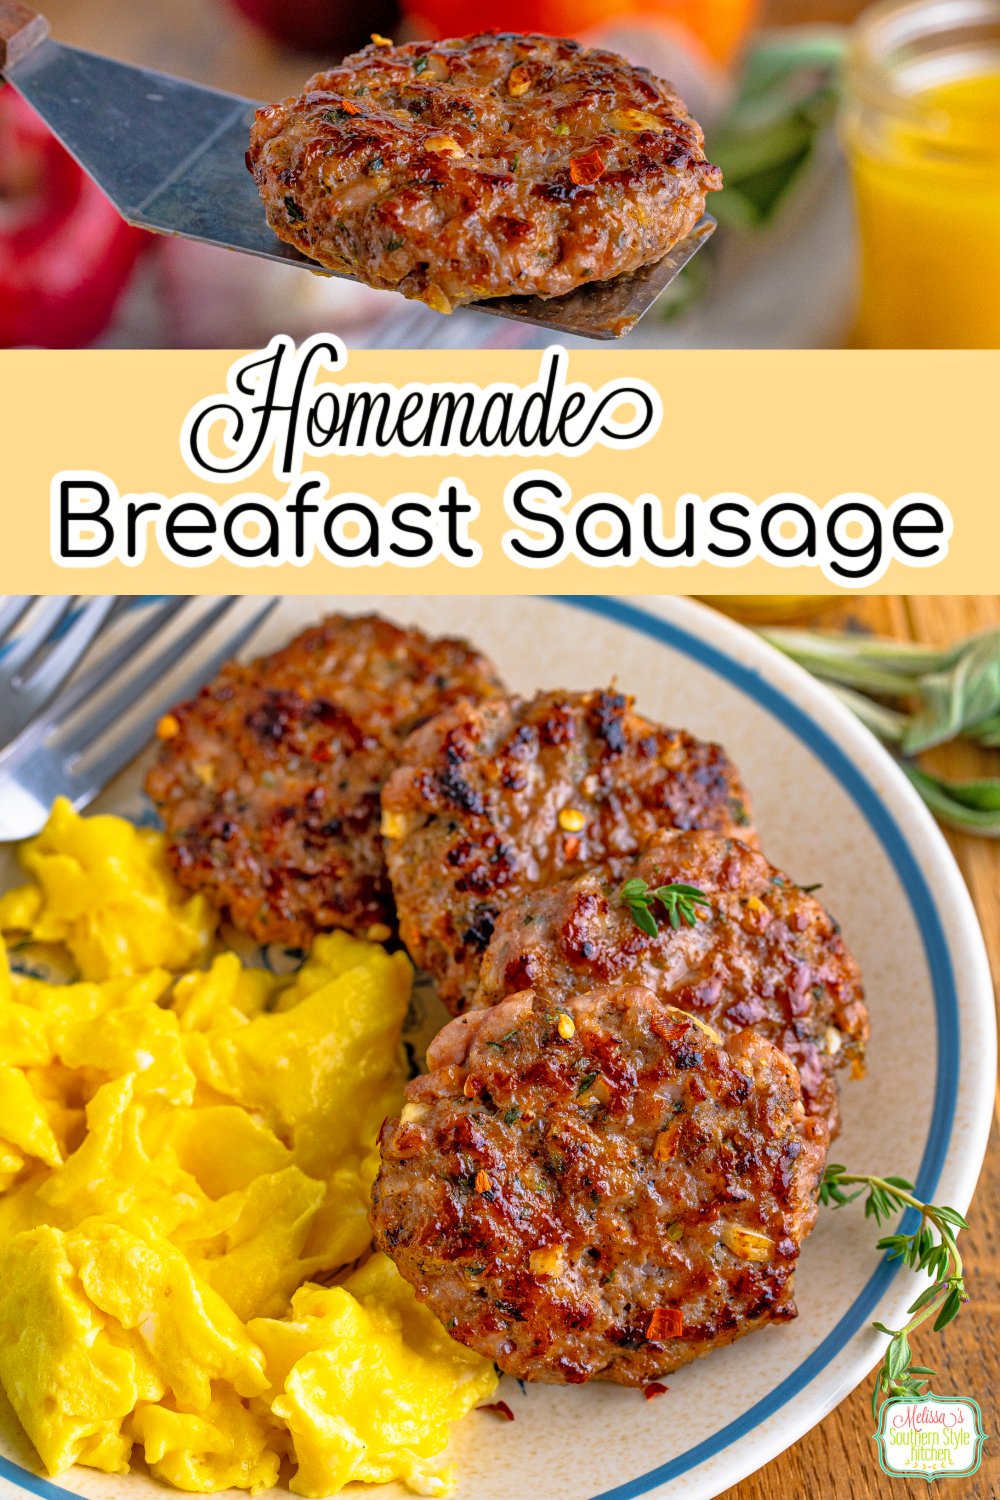 This homemade Breakfast Sausage recipe features a combination of fresh herbs and seasonings that makes it next level in flavor #breakfastrecipes #breakfastsausage #groundporkrecipes #easyporkrecipes #homemadesausagerecipe #sausage #countrysausage #southernsausagerecipe